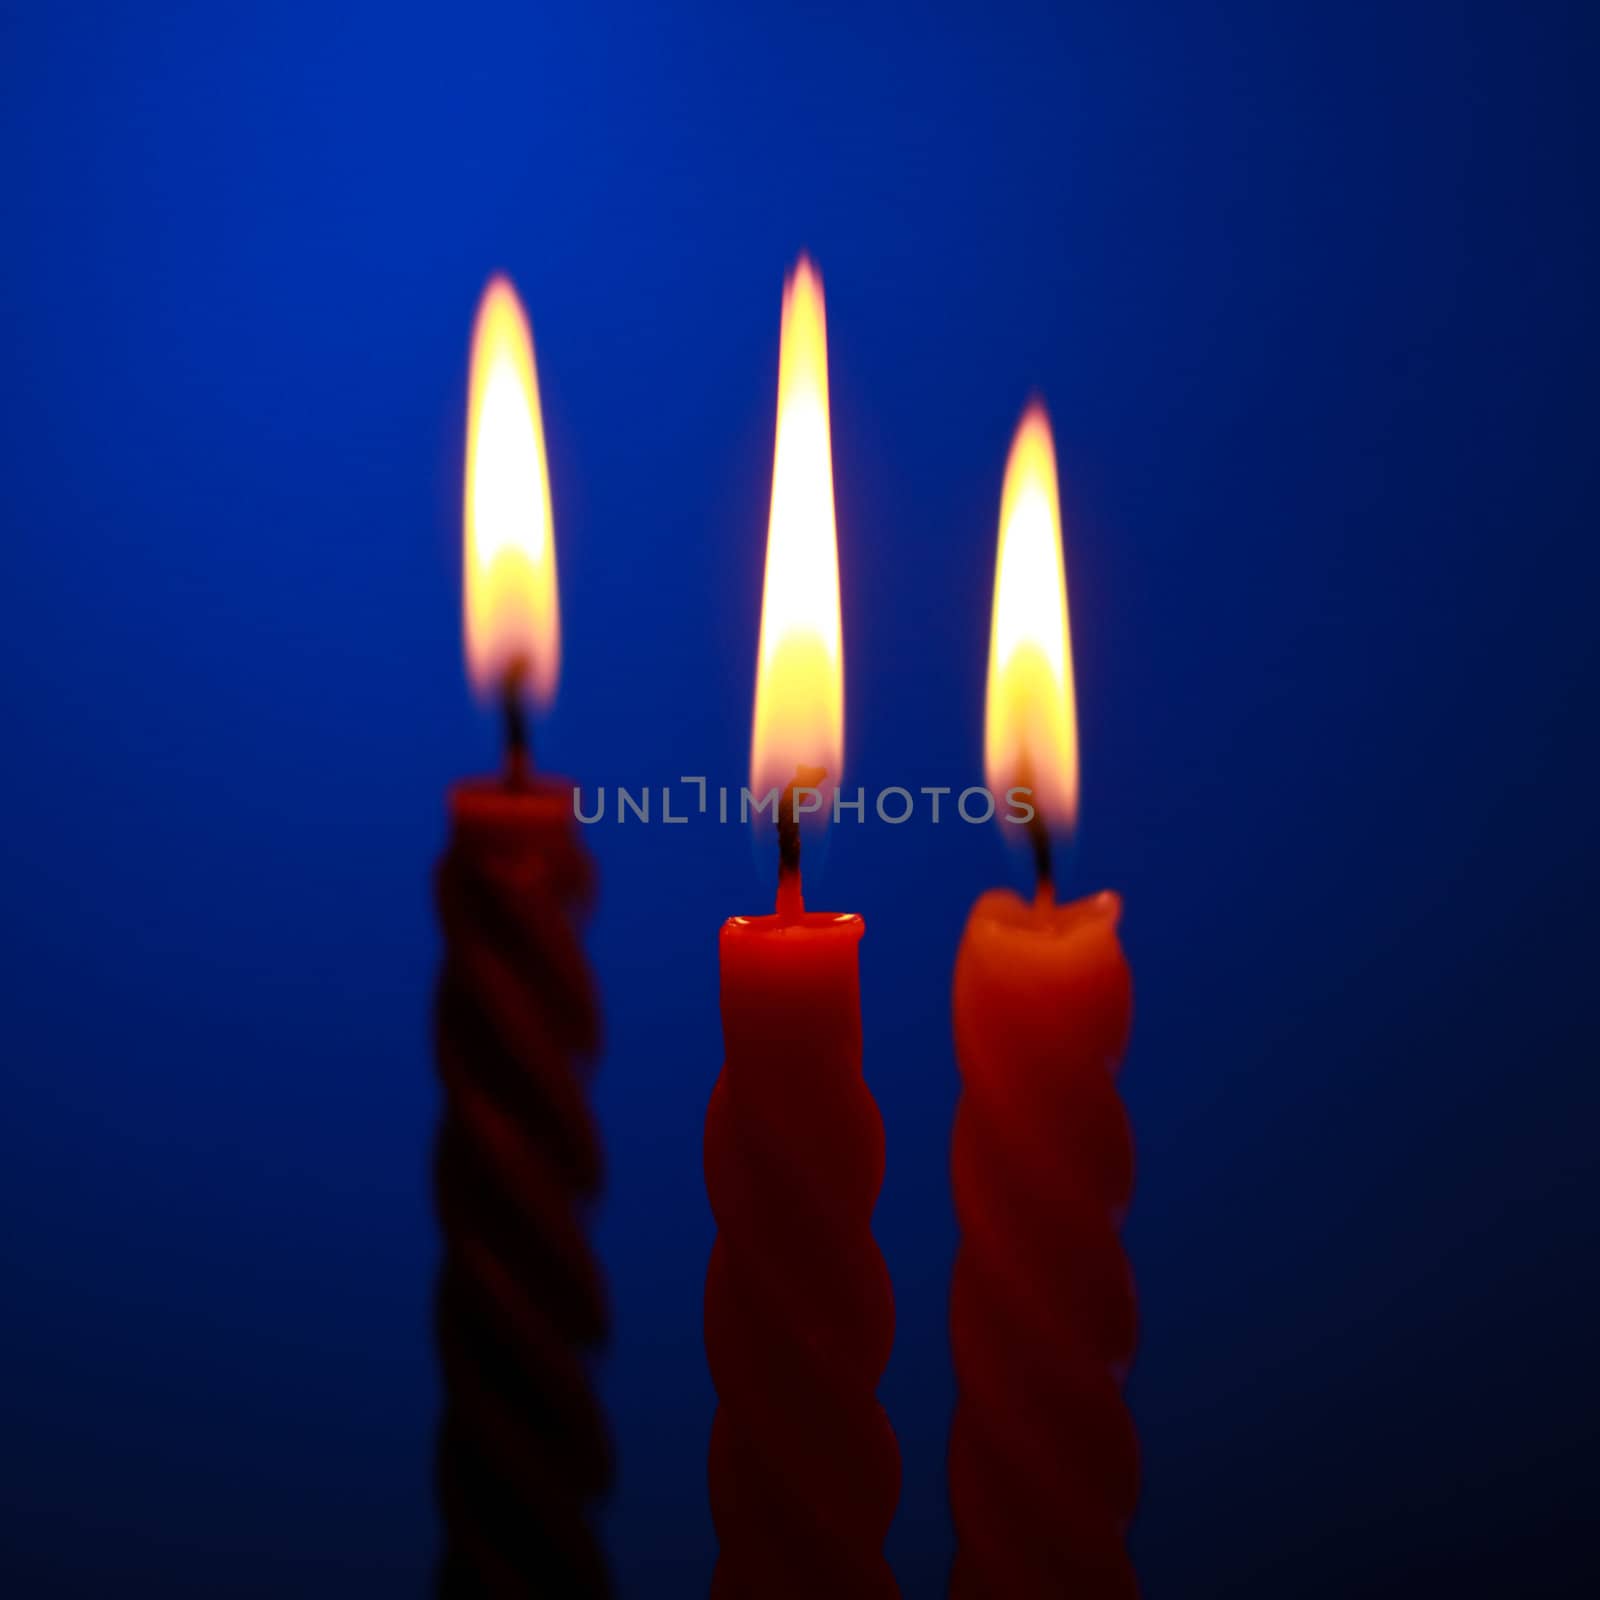 Three Candles On Blue by petr_malyshev